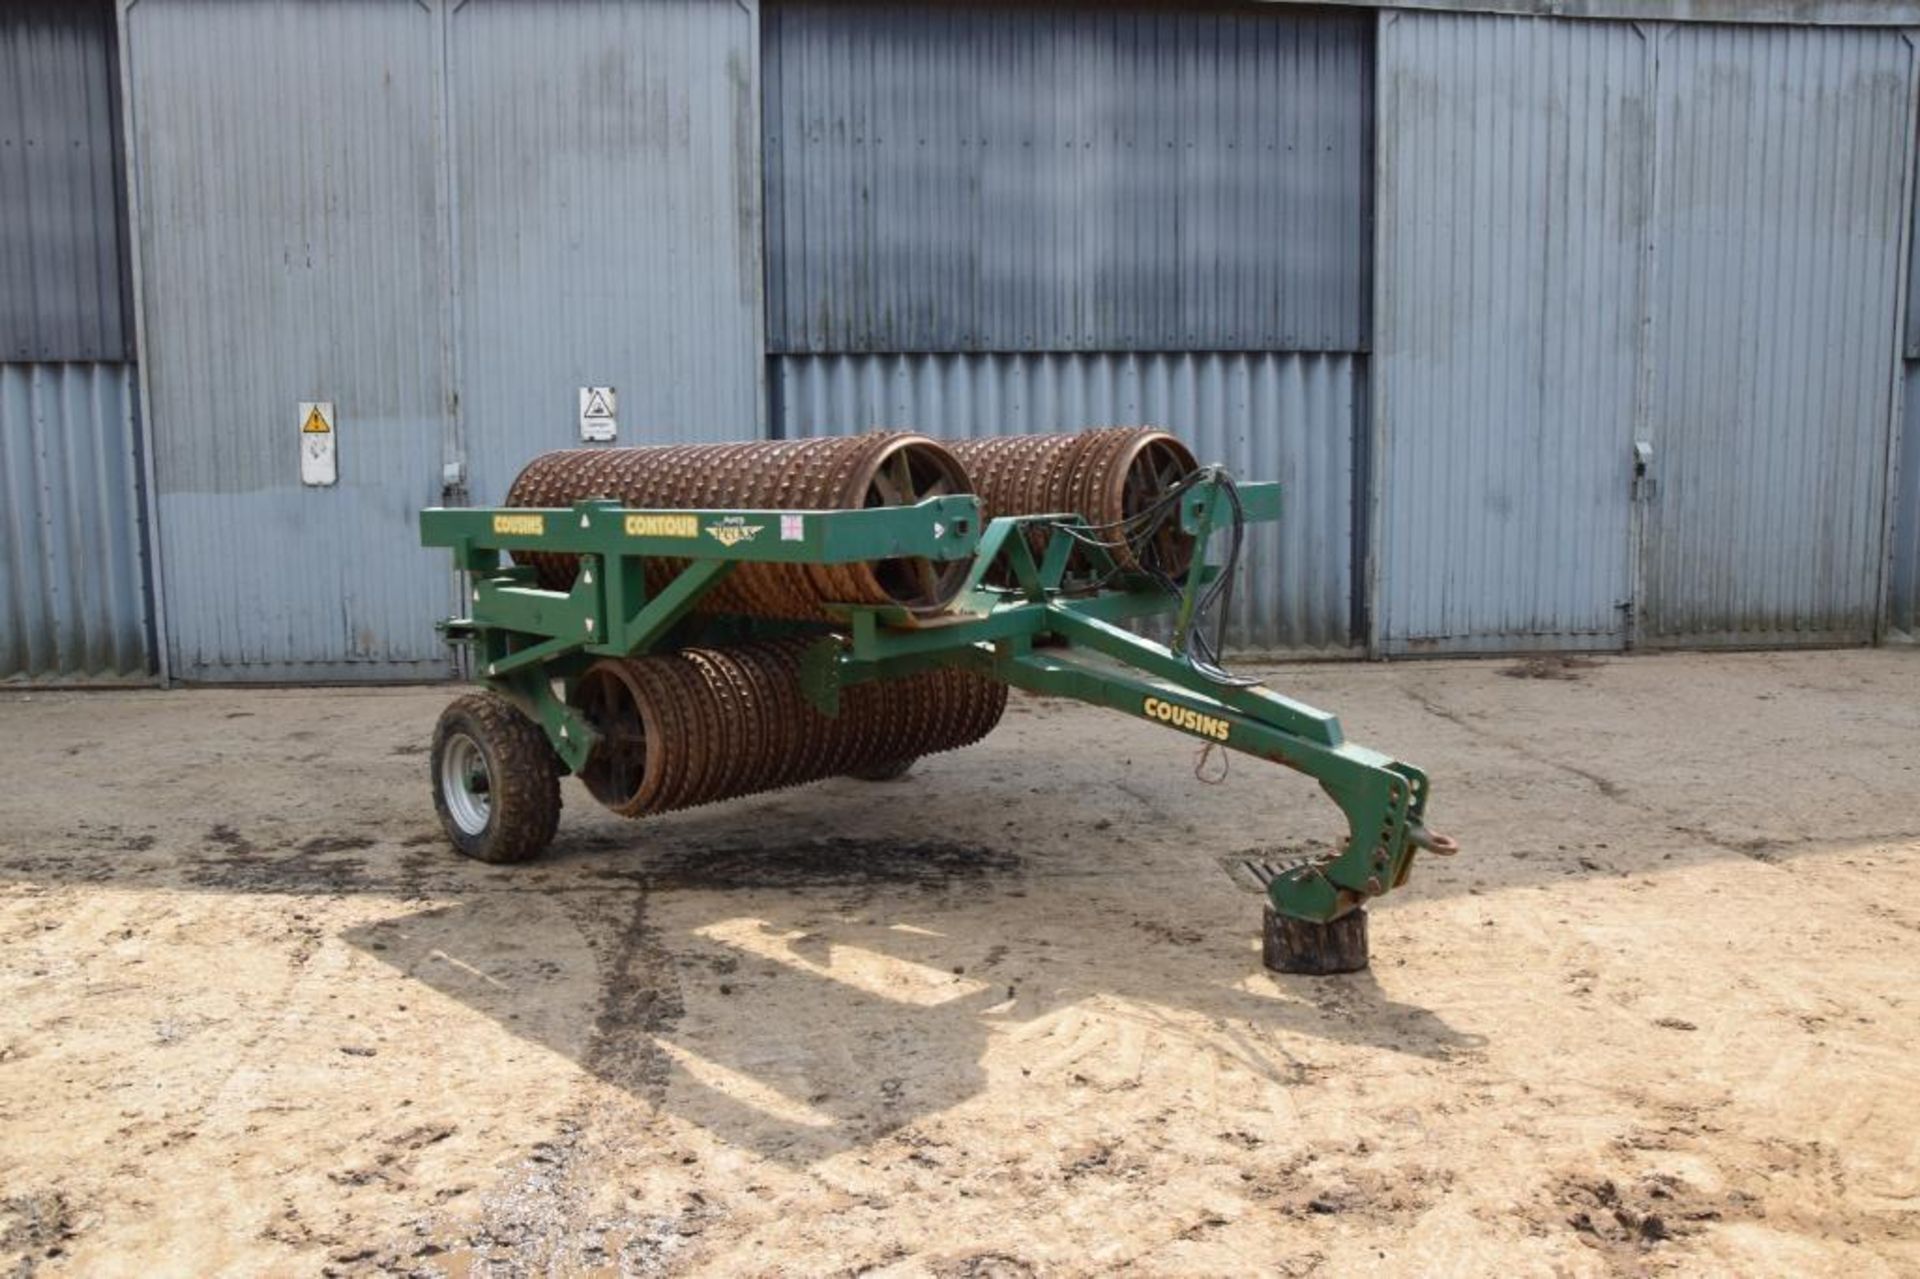 2010 Cousins Contour 6.3m horizontal folding cambridge rolls with breaker rings. Serial No: 2010066 - Image 2 of 16